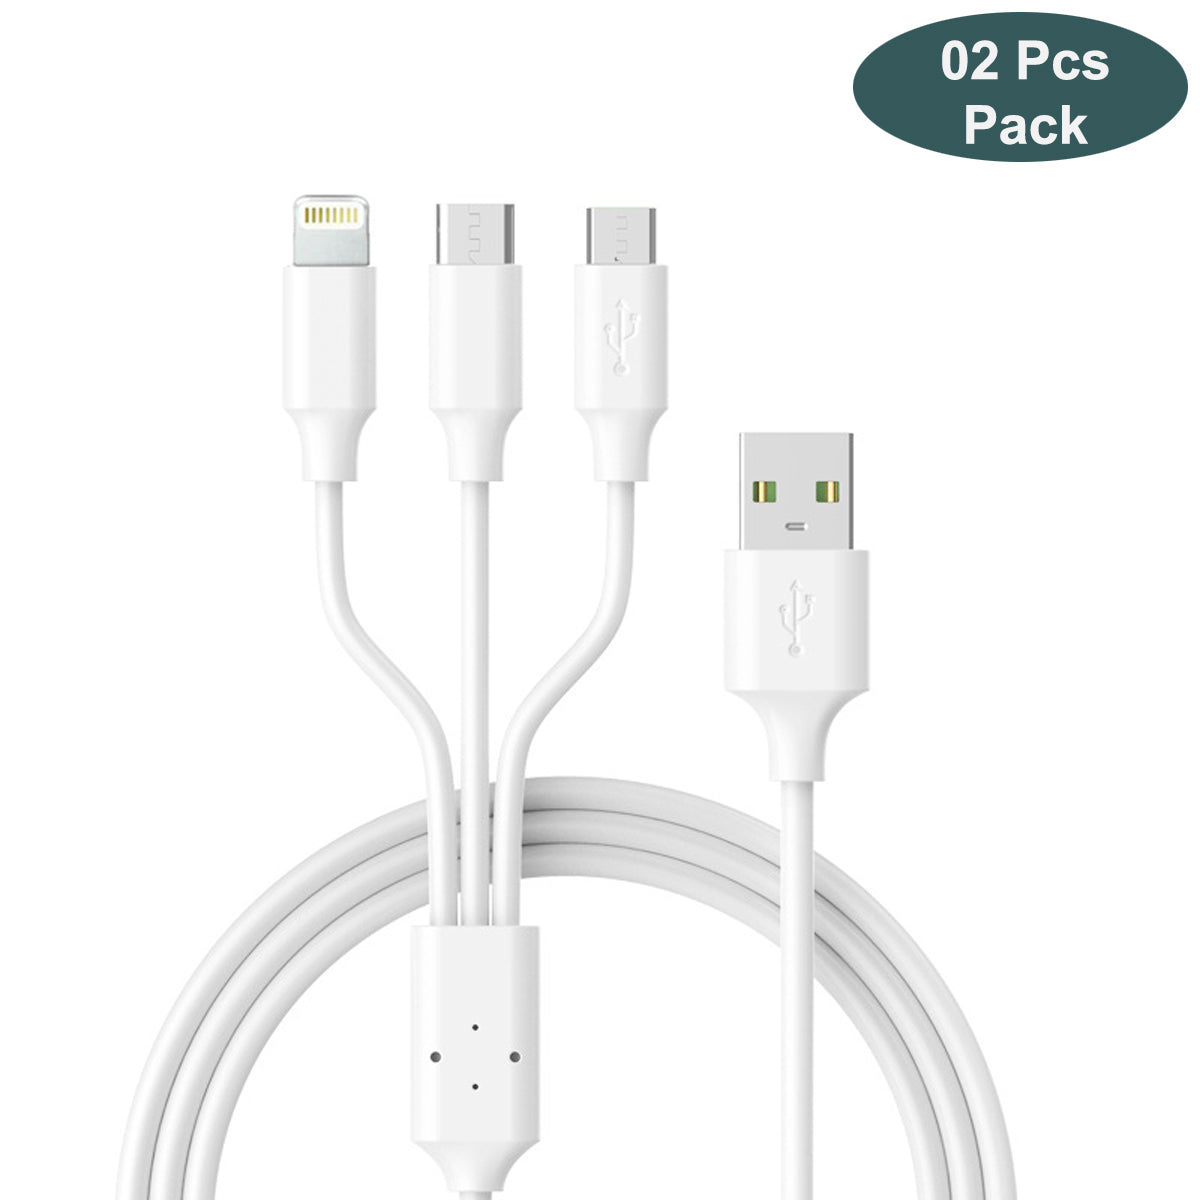 3 in 1 cable